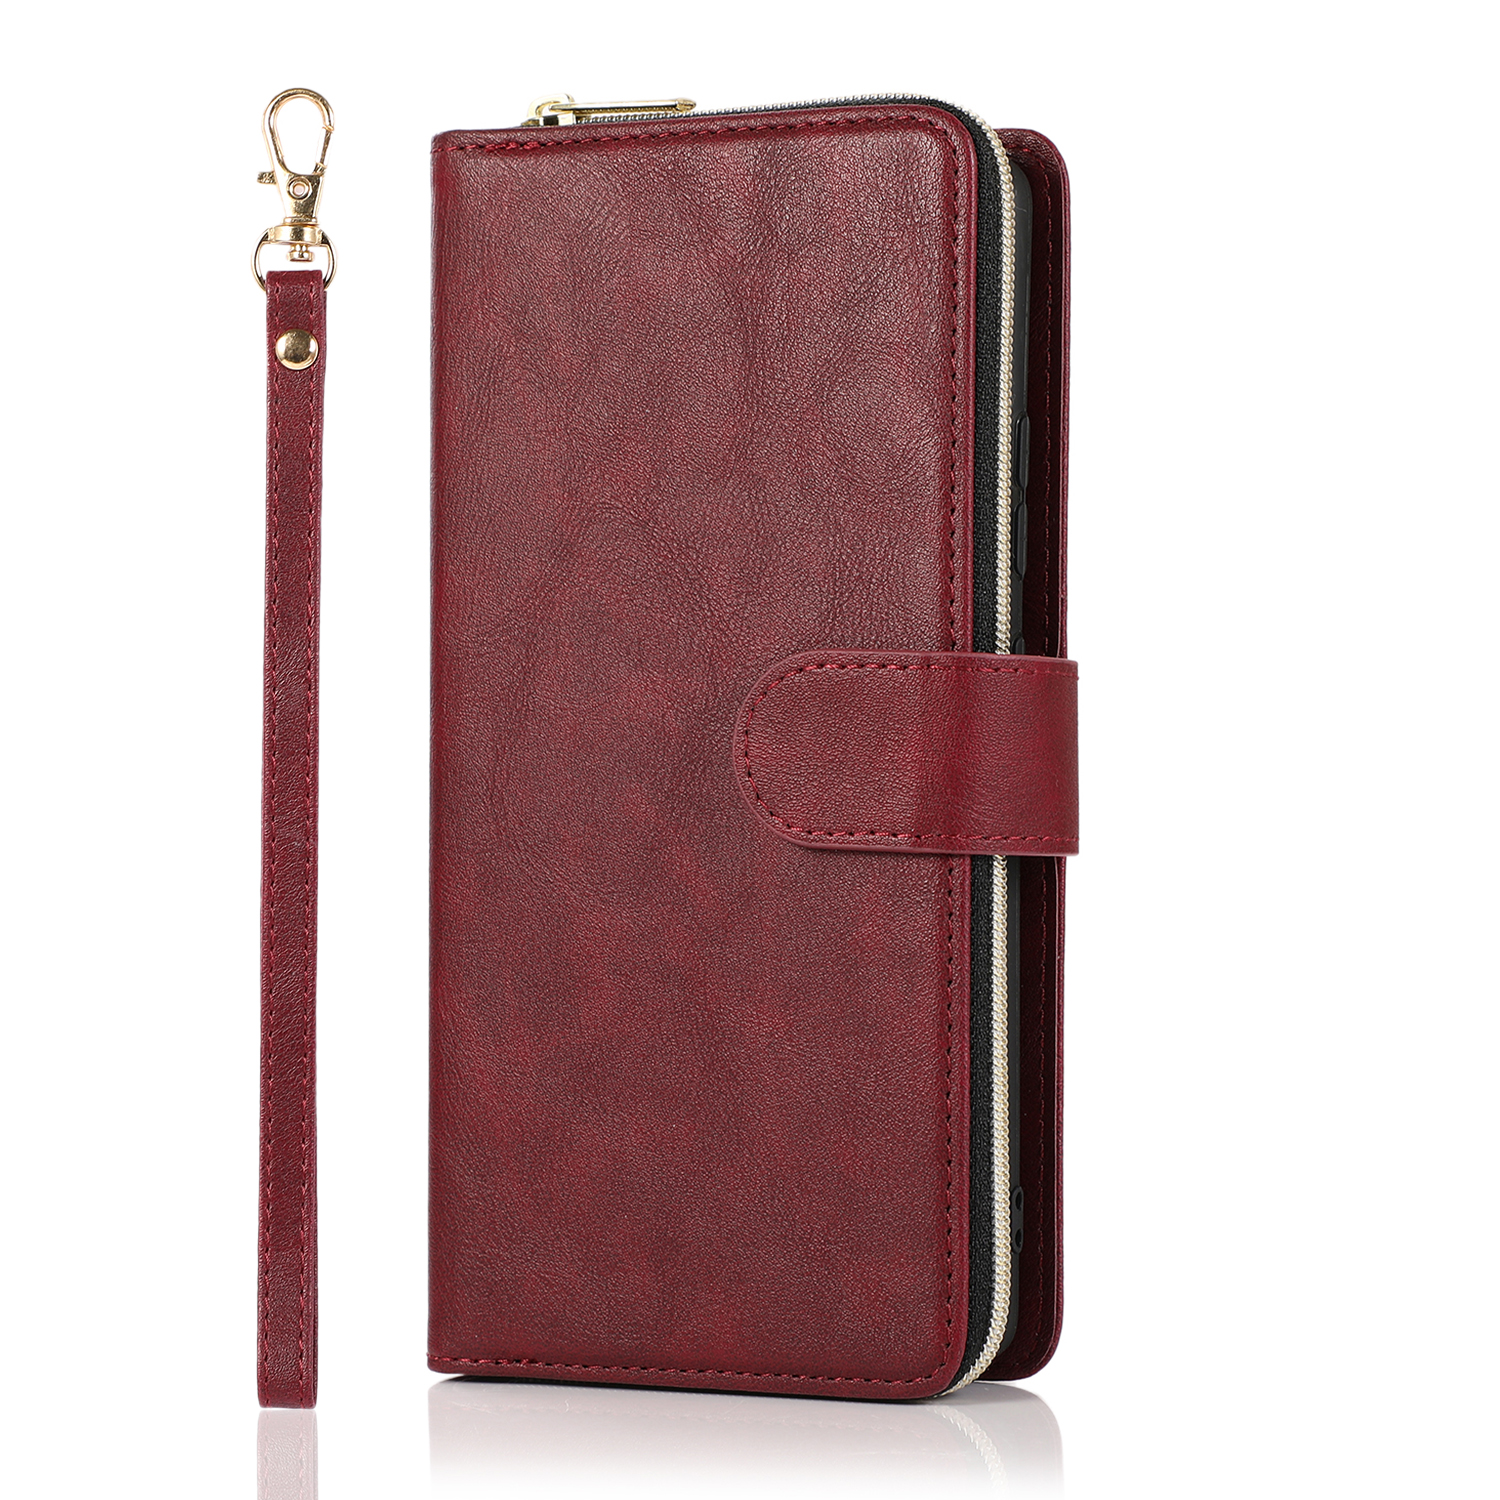 For Samsung A51 5G/A71 5G/Note 10 pro Pu Leather  Mobile Phone Cover Zipper Card Bag + Wrist Strap Red wine